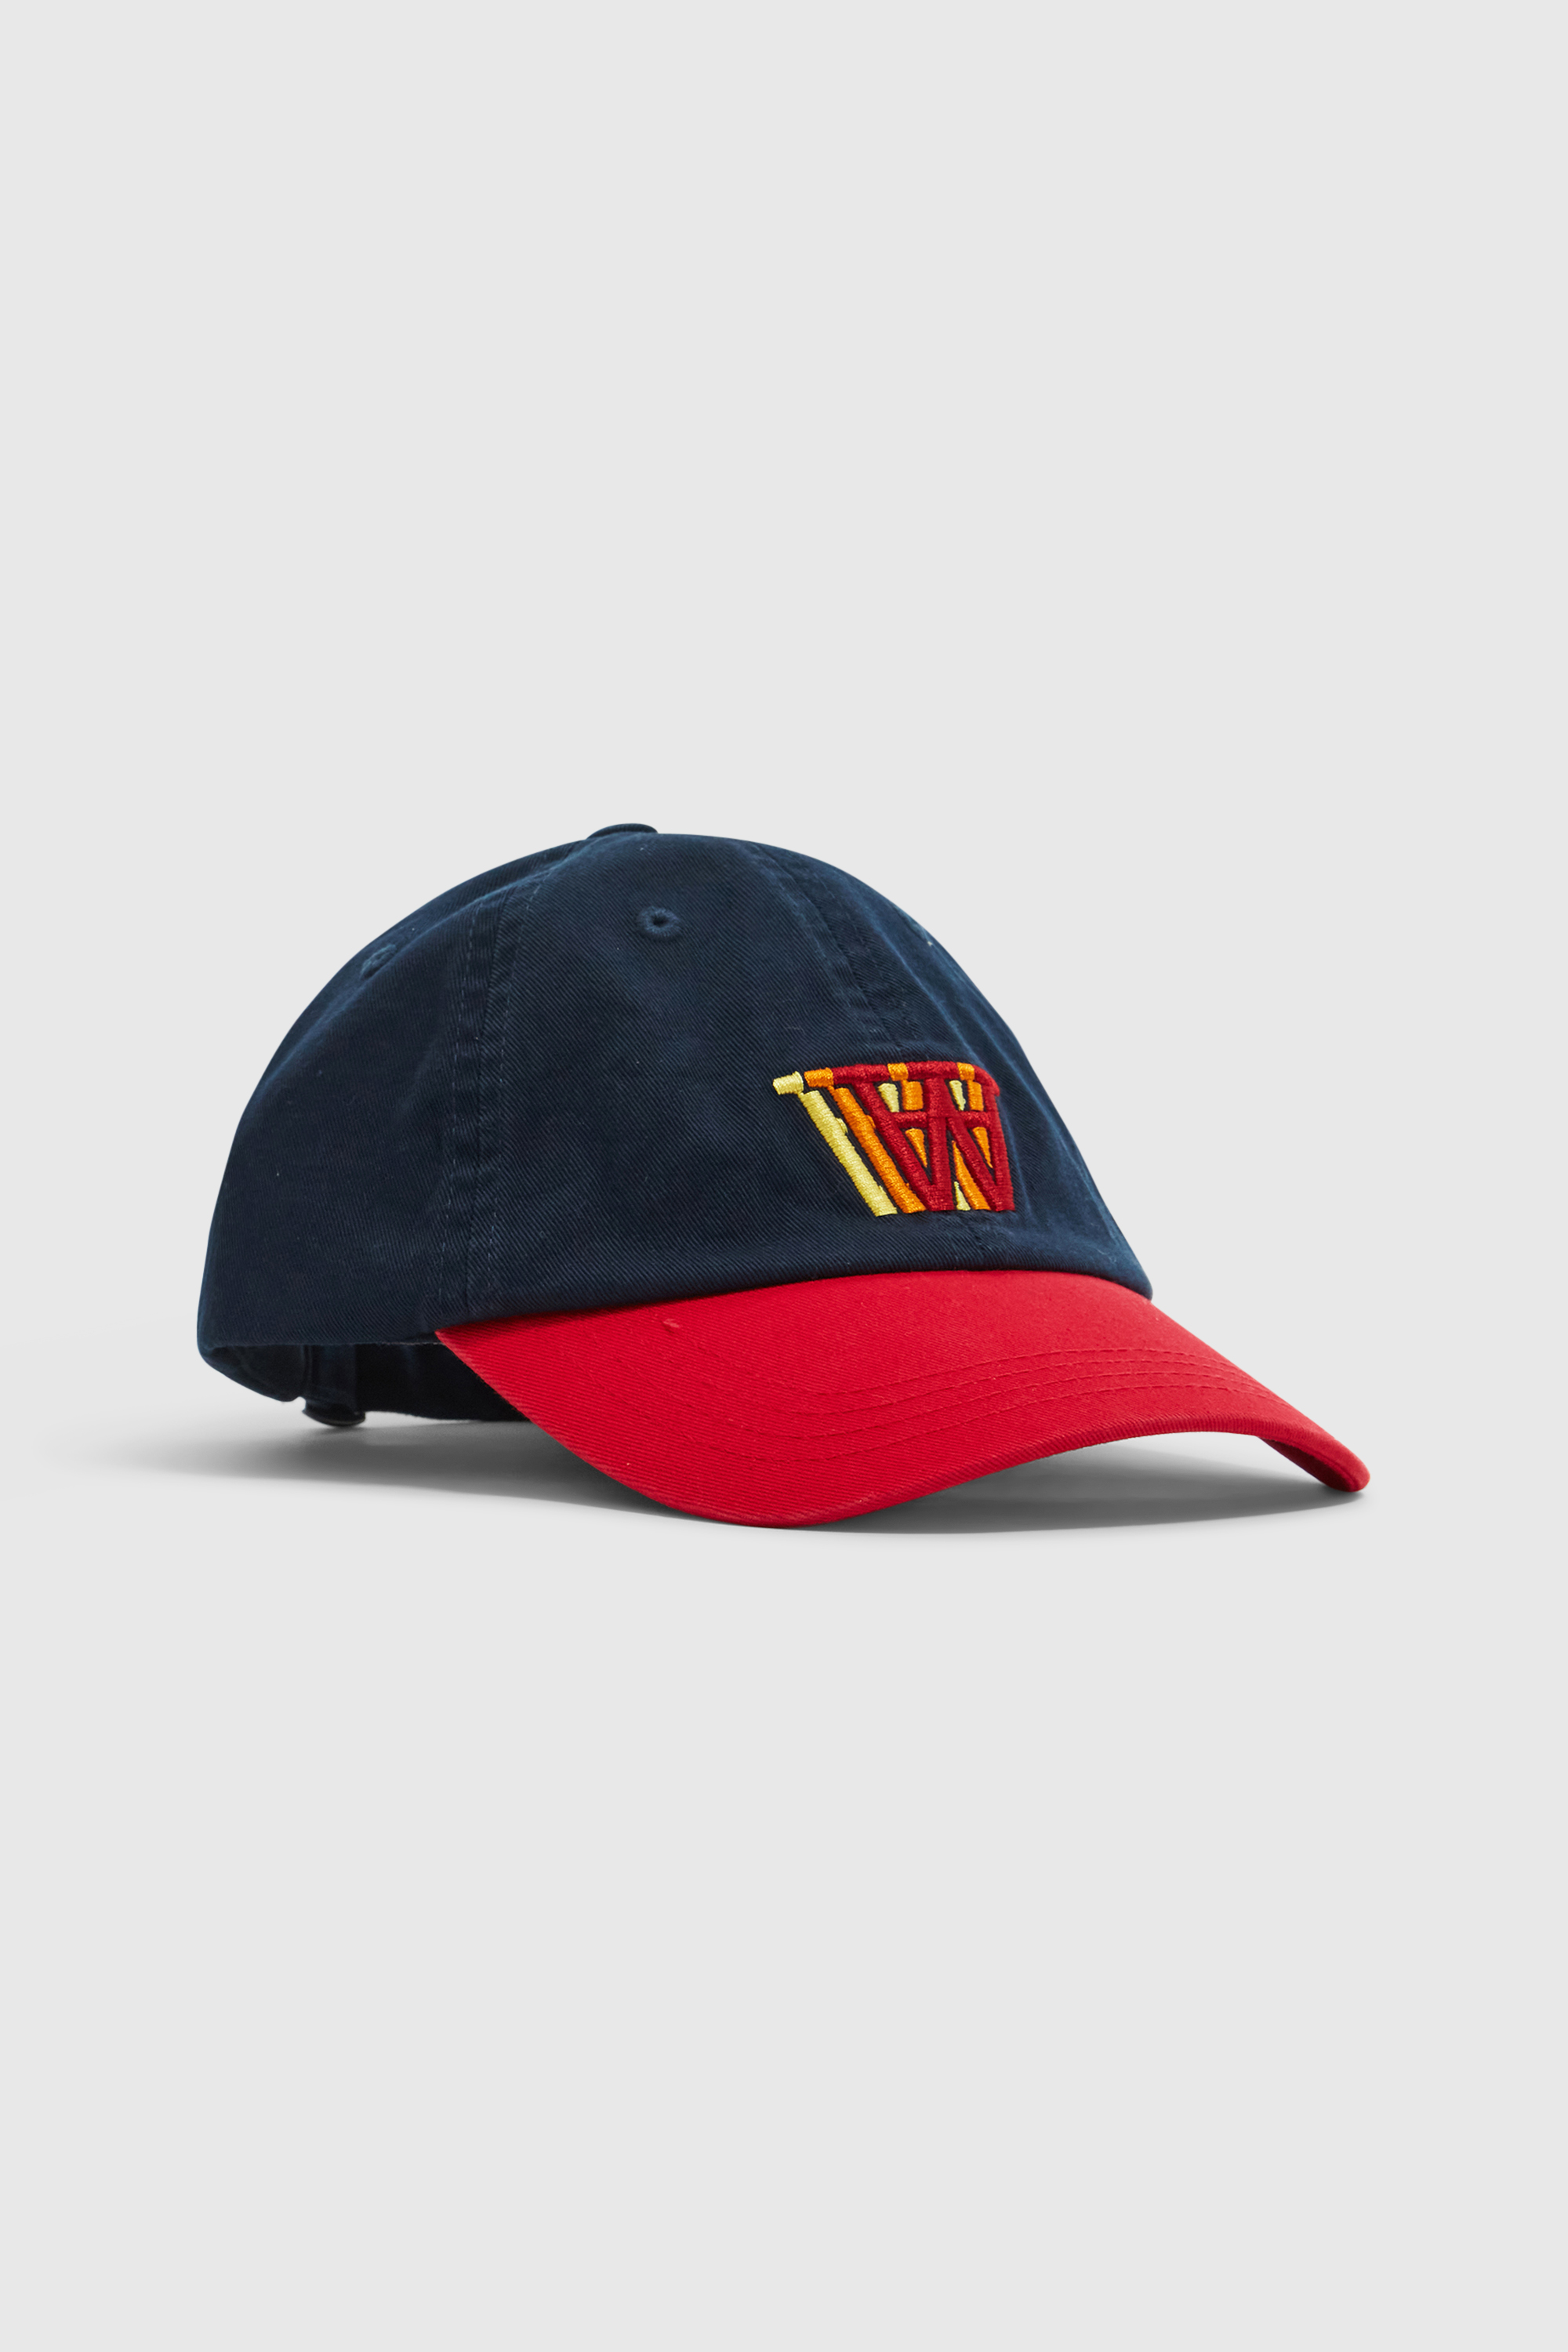 by two-tone Wood A AA Navy cap Double Eli Wood